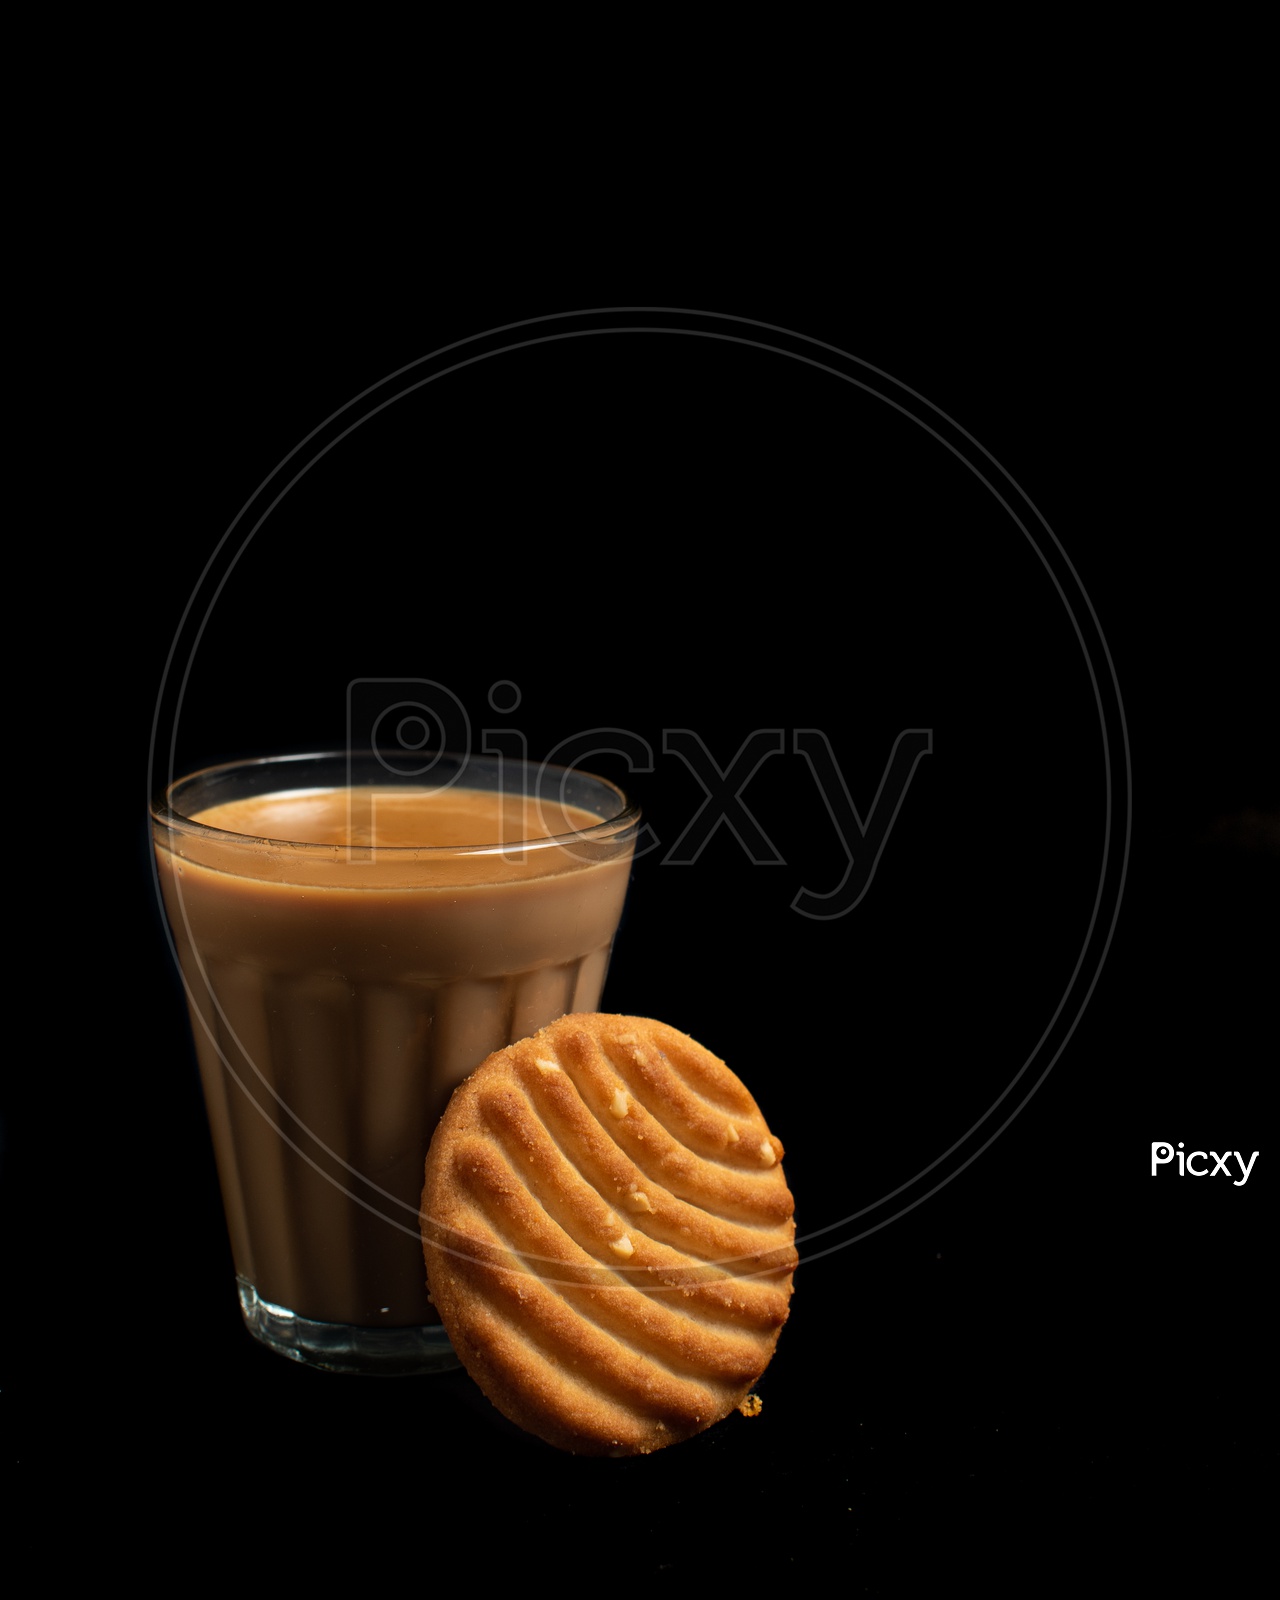 Aromatic beverage Tea/chai   and Good-day biscuits placed on black background.